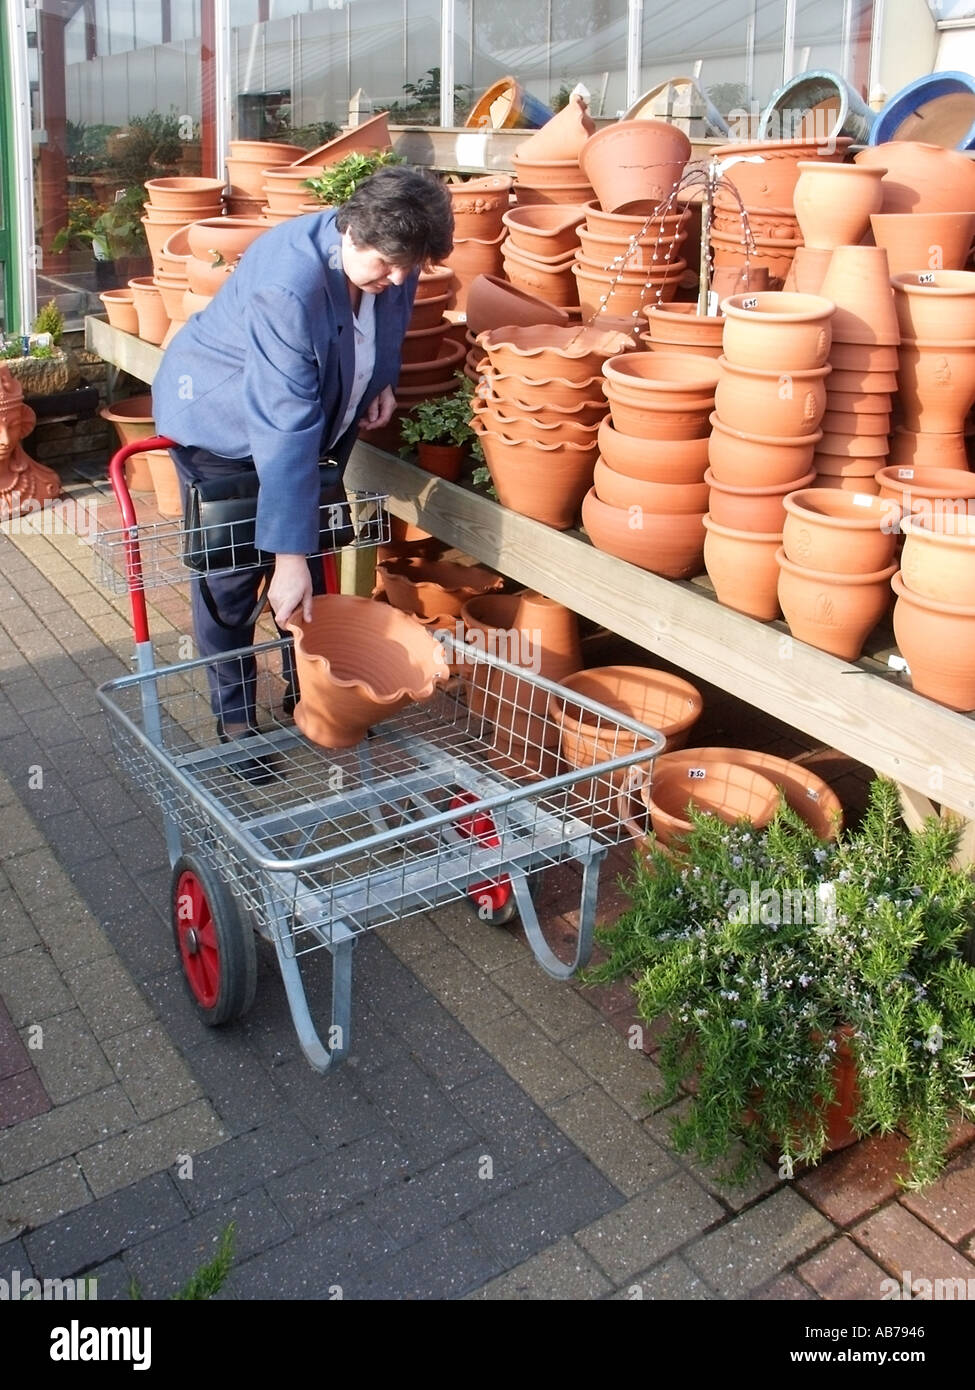 Harlow Essex garden centre 61 sixty one year old lady selecting garden pots Stock Photo